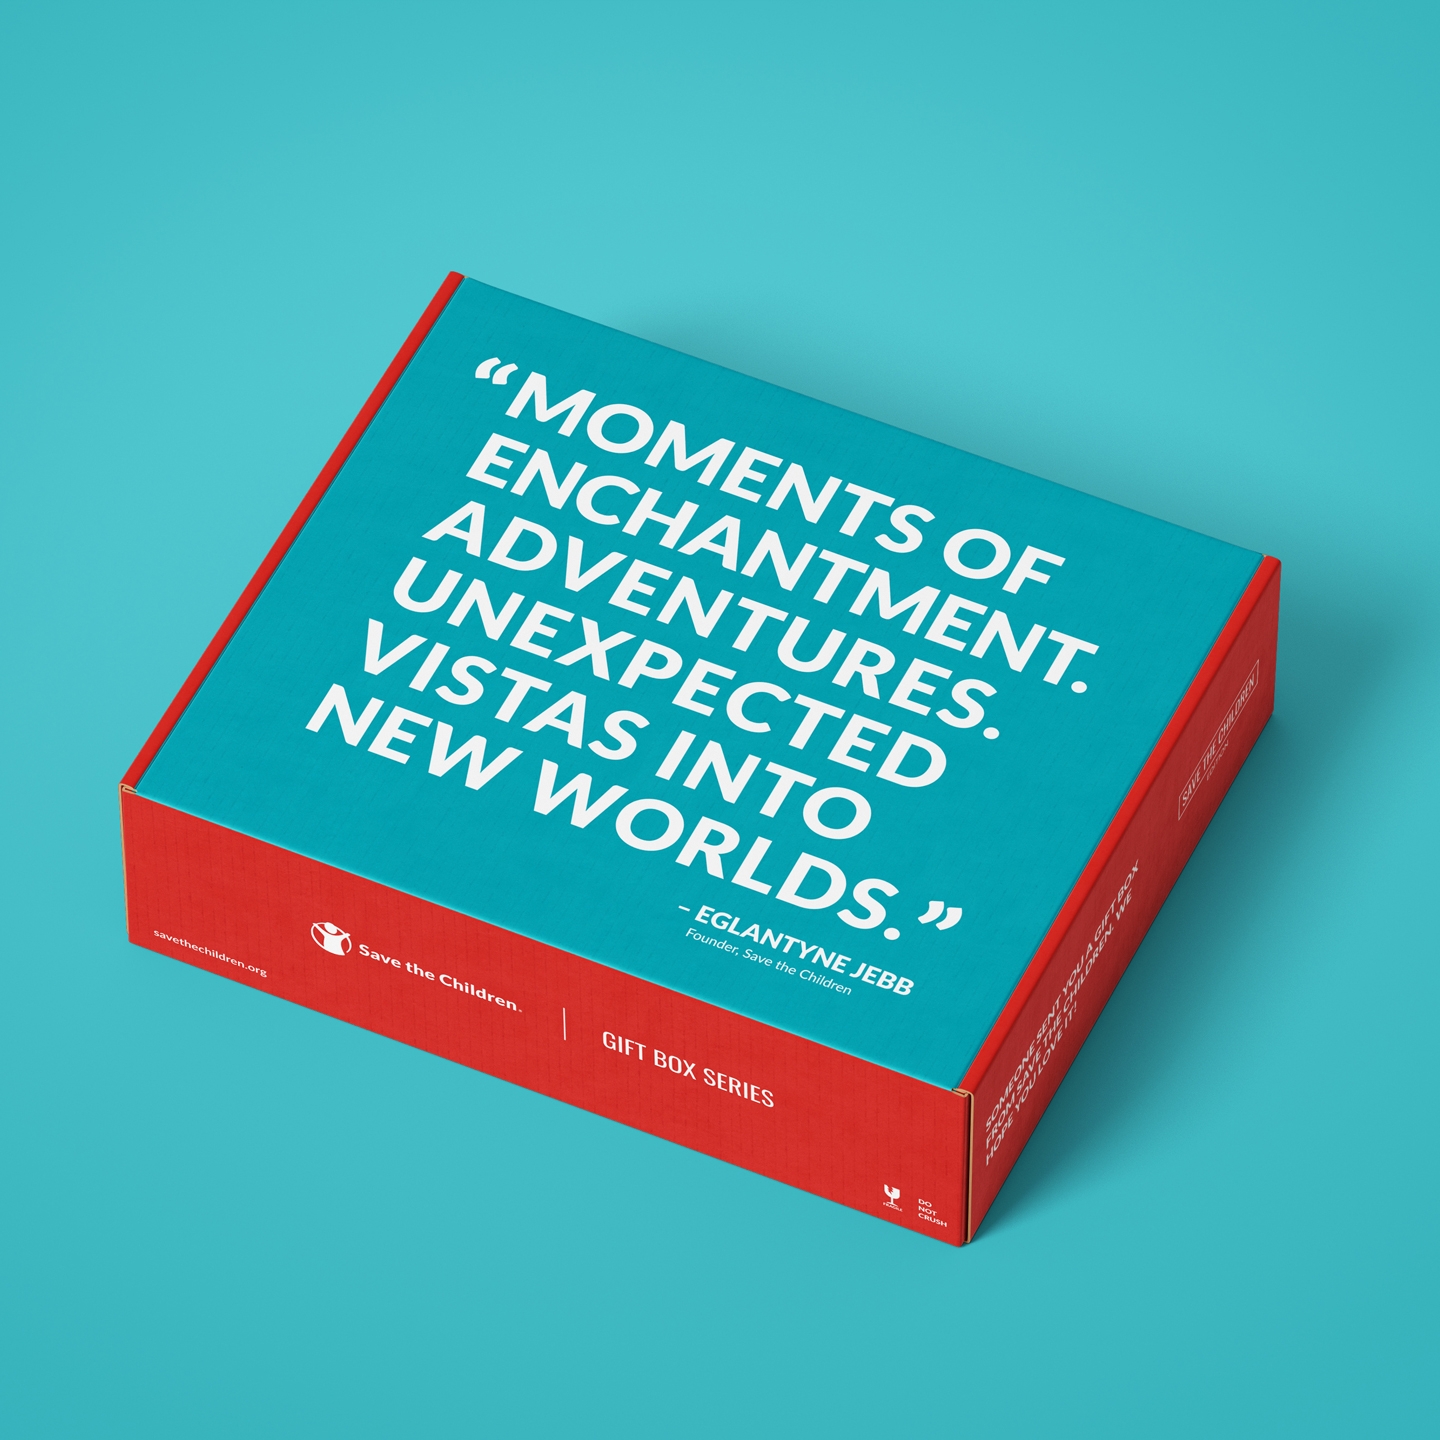 Gift Box that says: Moments of Enchantment. Adventures. Unexpected Vistas into New Worlds. - Eglantyne Jebb